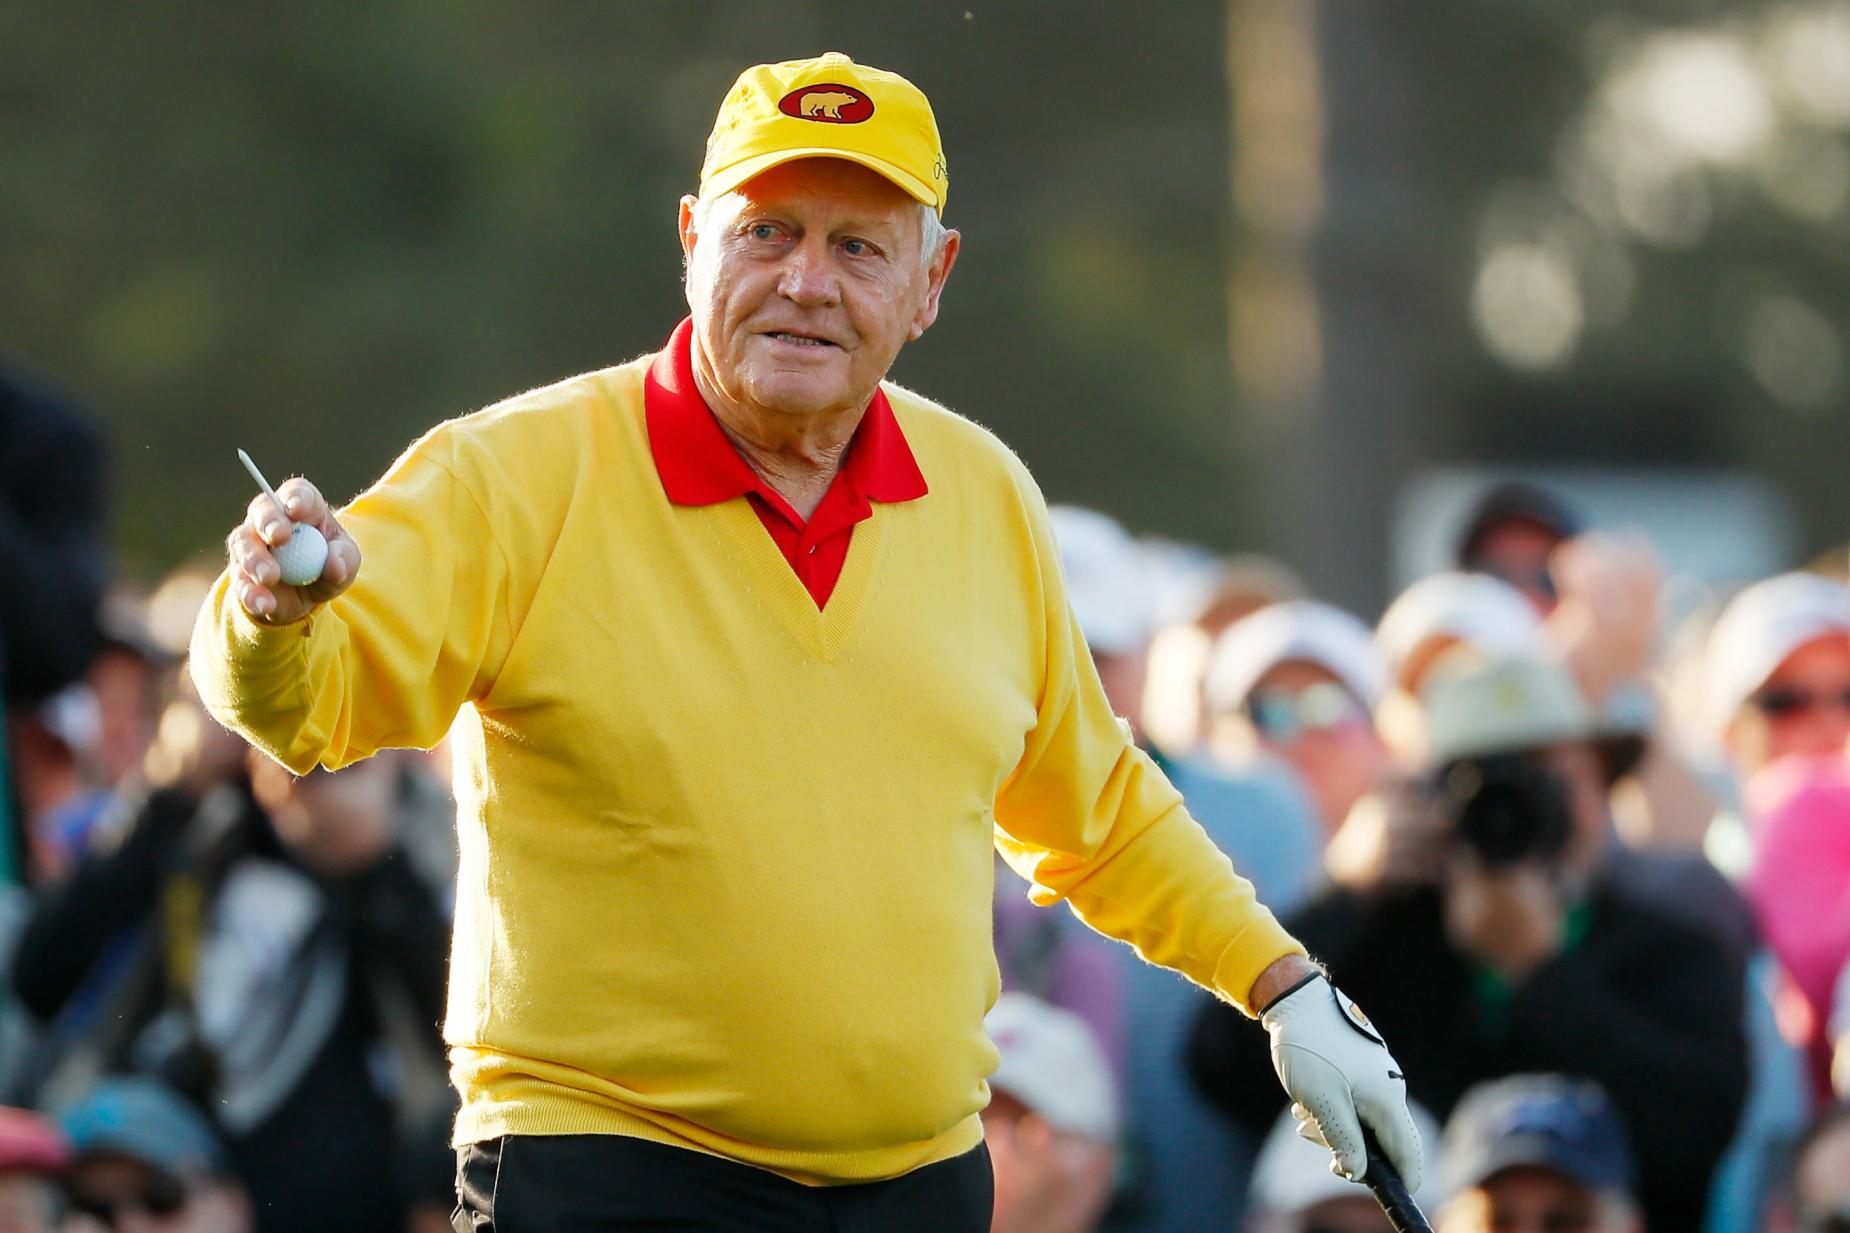 Jack Nicklaus at 80: 'I've still got a lot of things I want to do ...